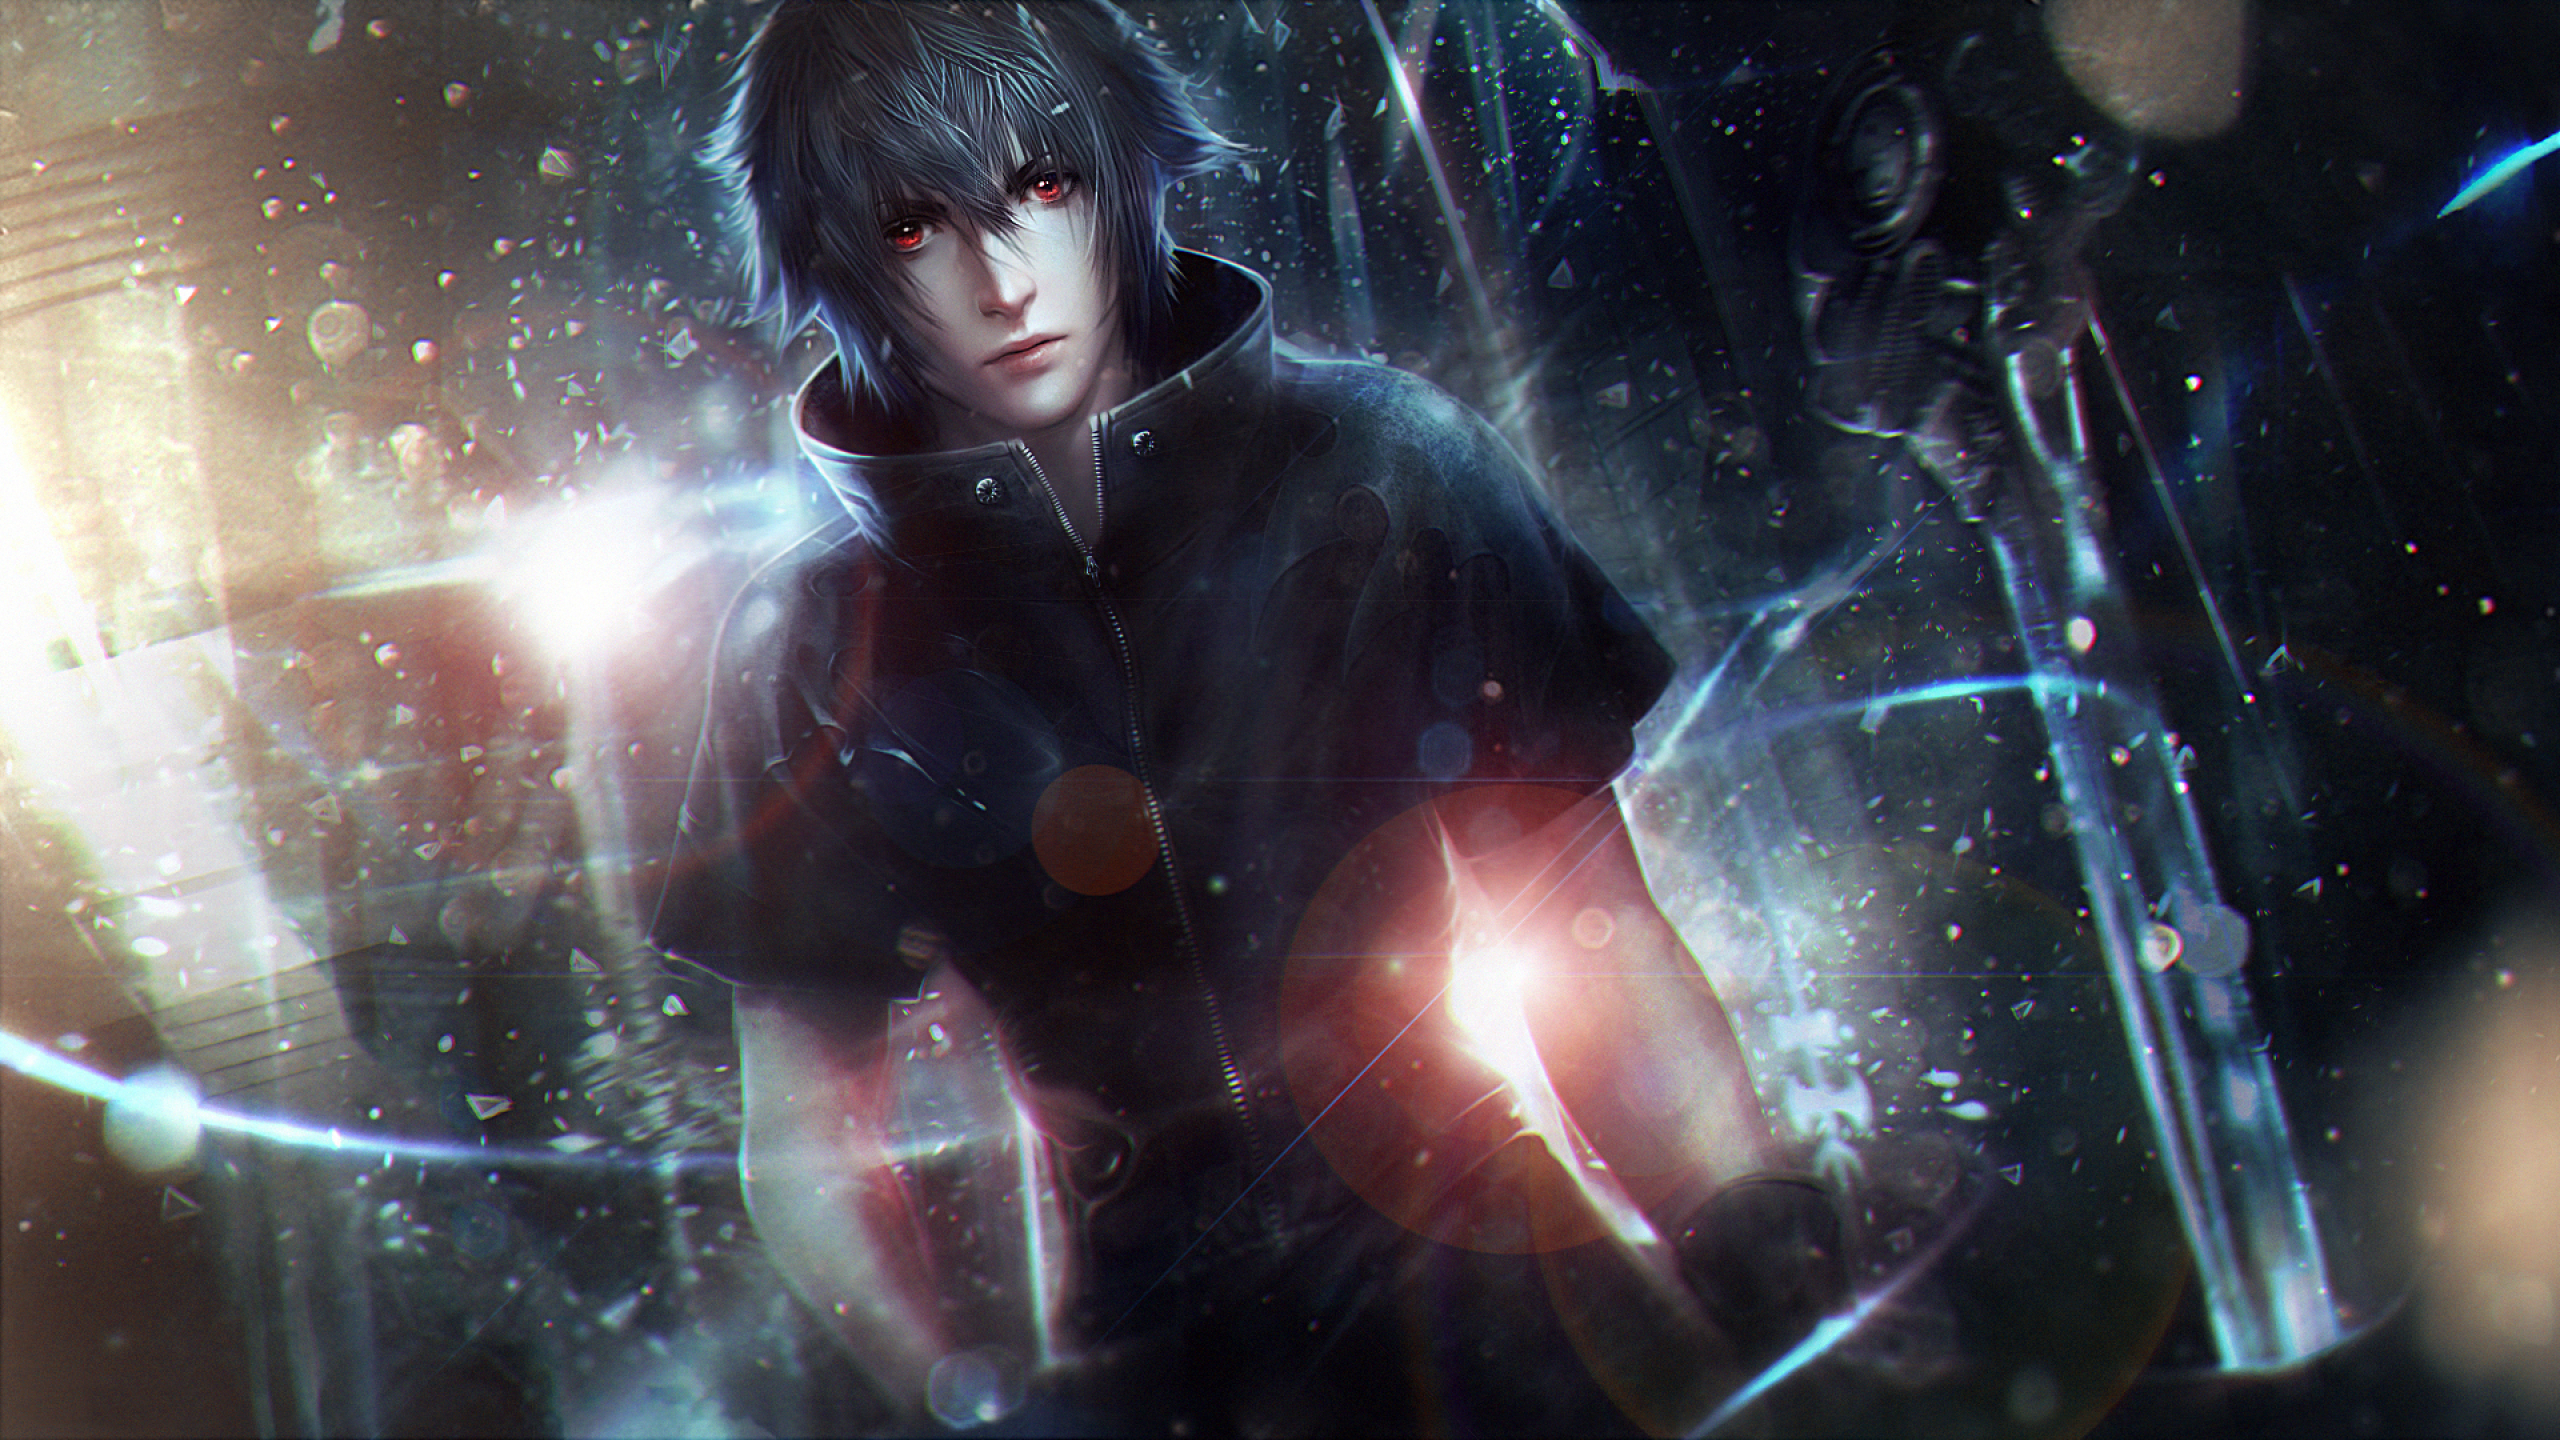 2560x1440 Final Fantasy Xv Art Boy 1440p Resolution Wallpaper Hd Games 4k Wallpapers Images Photos And Background